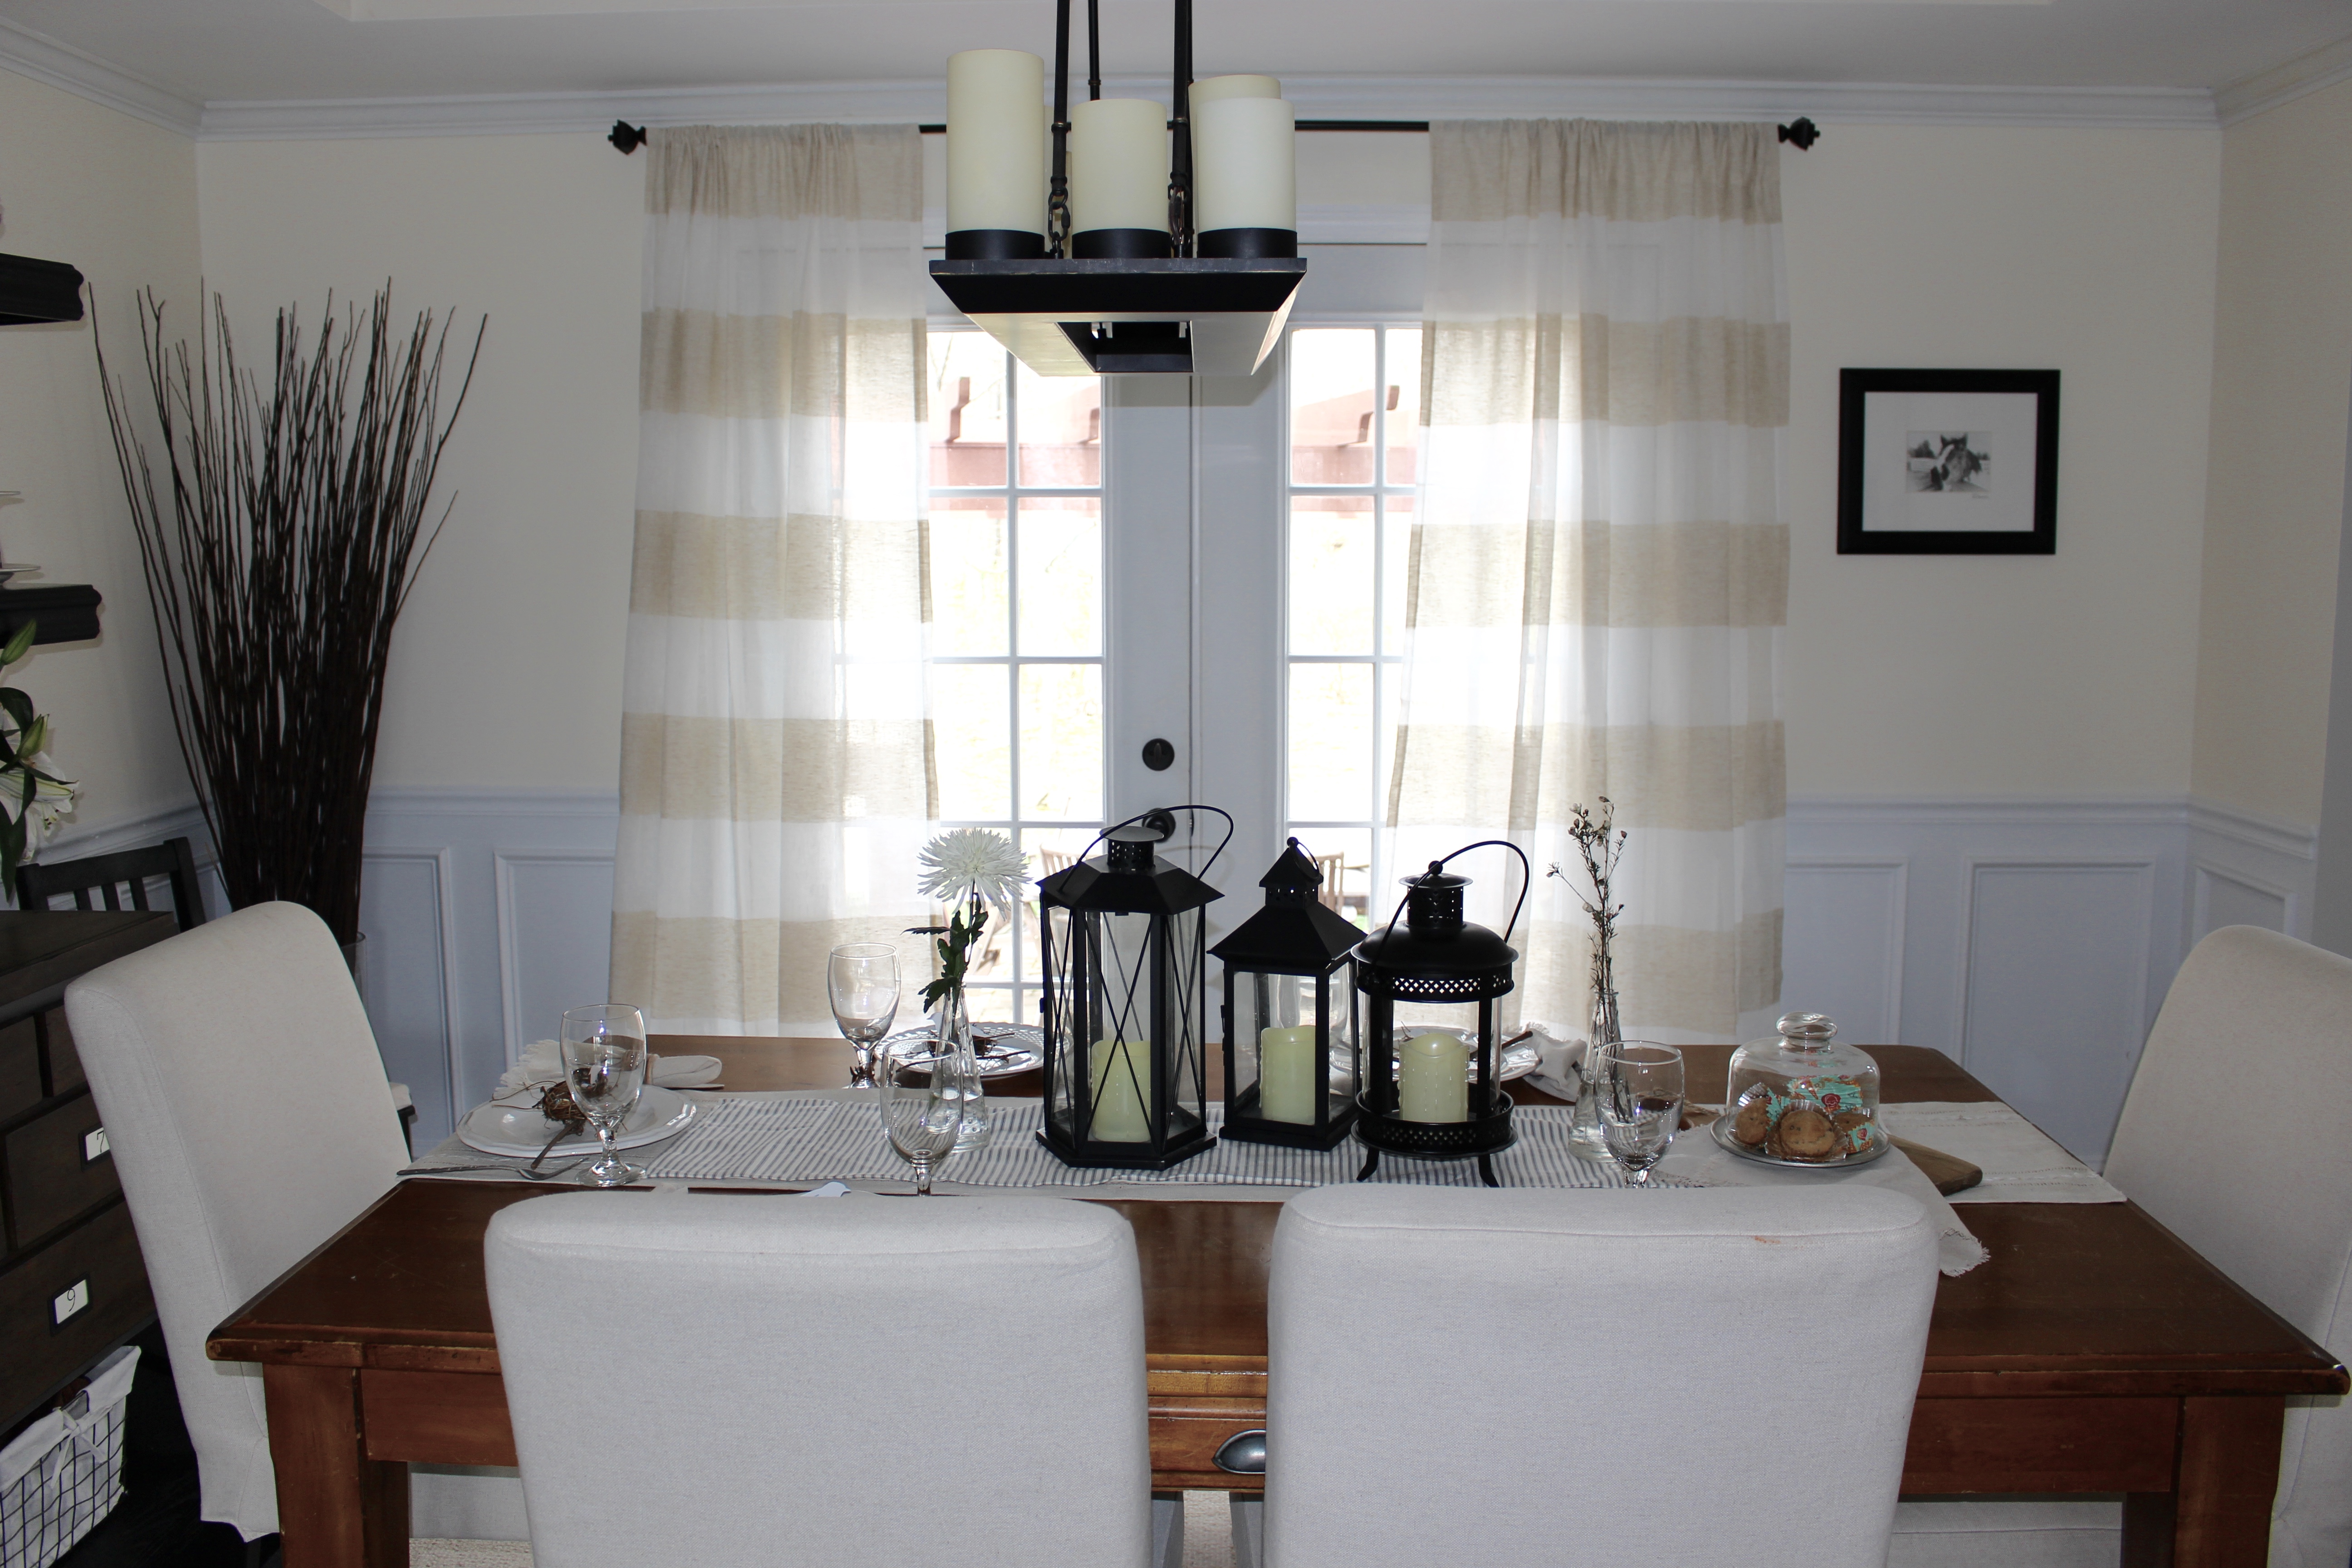 Dining Room for Spring by www.whitecottagehomeandliving.com